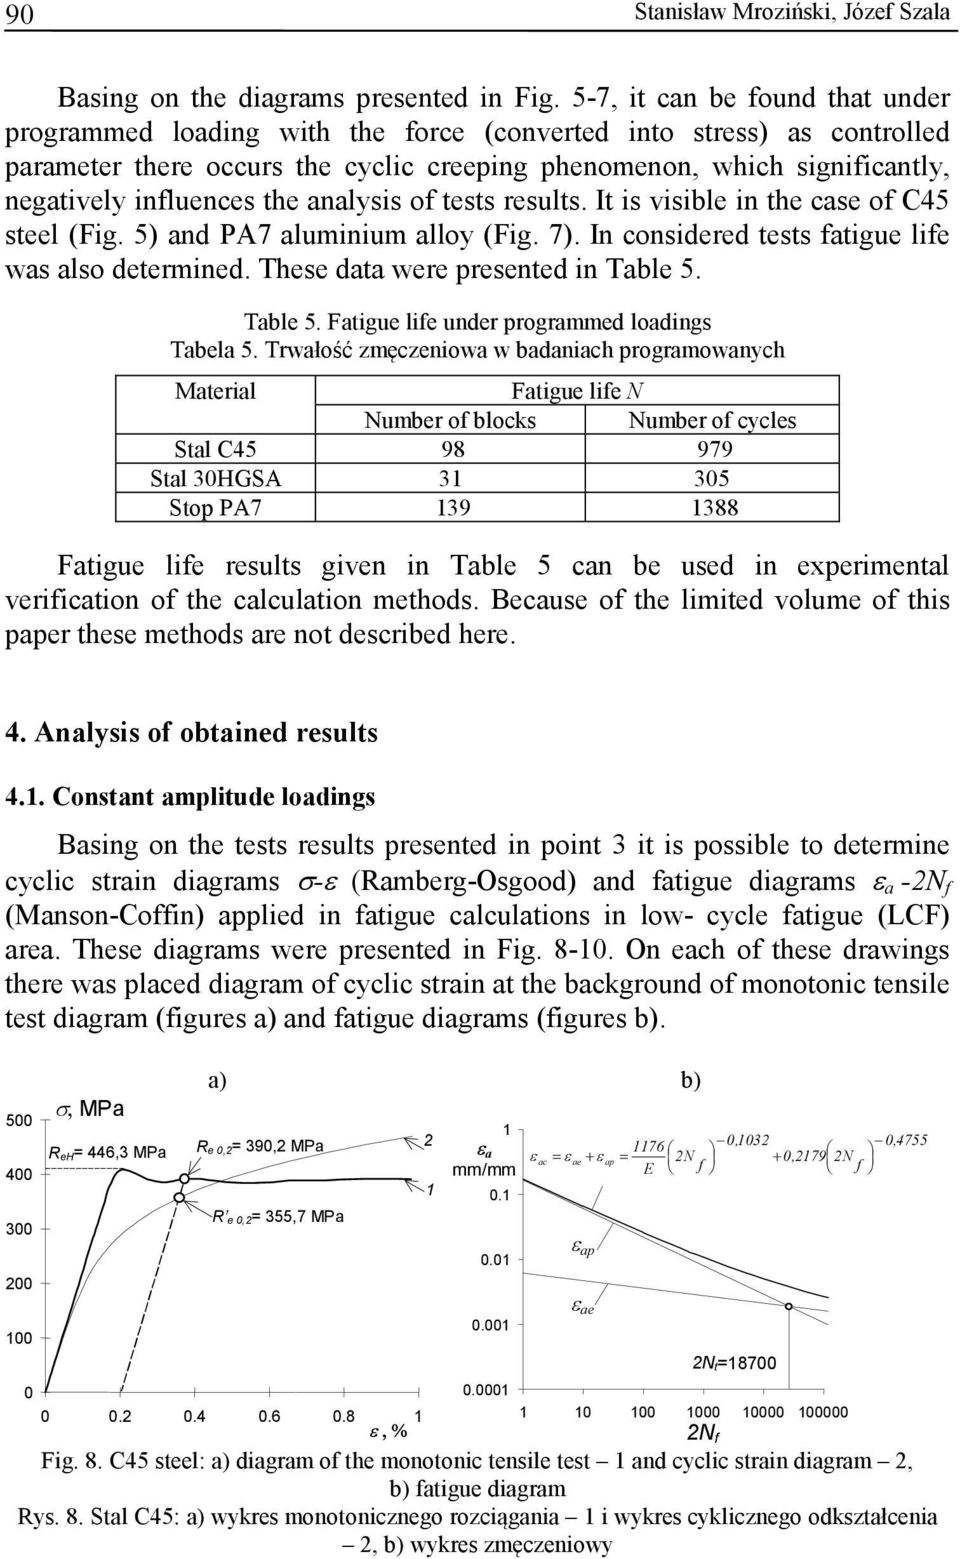 influences the analysis of tests results. It is visible in the case of C45 steel (Fig. 5) and PA7 aluminium alloy (Fig. 7). In considered tests fatigue life was also determined.